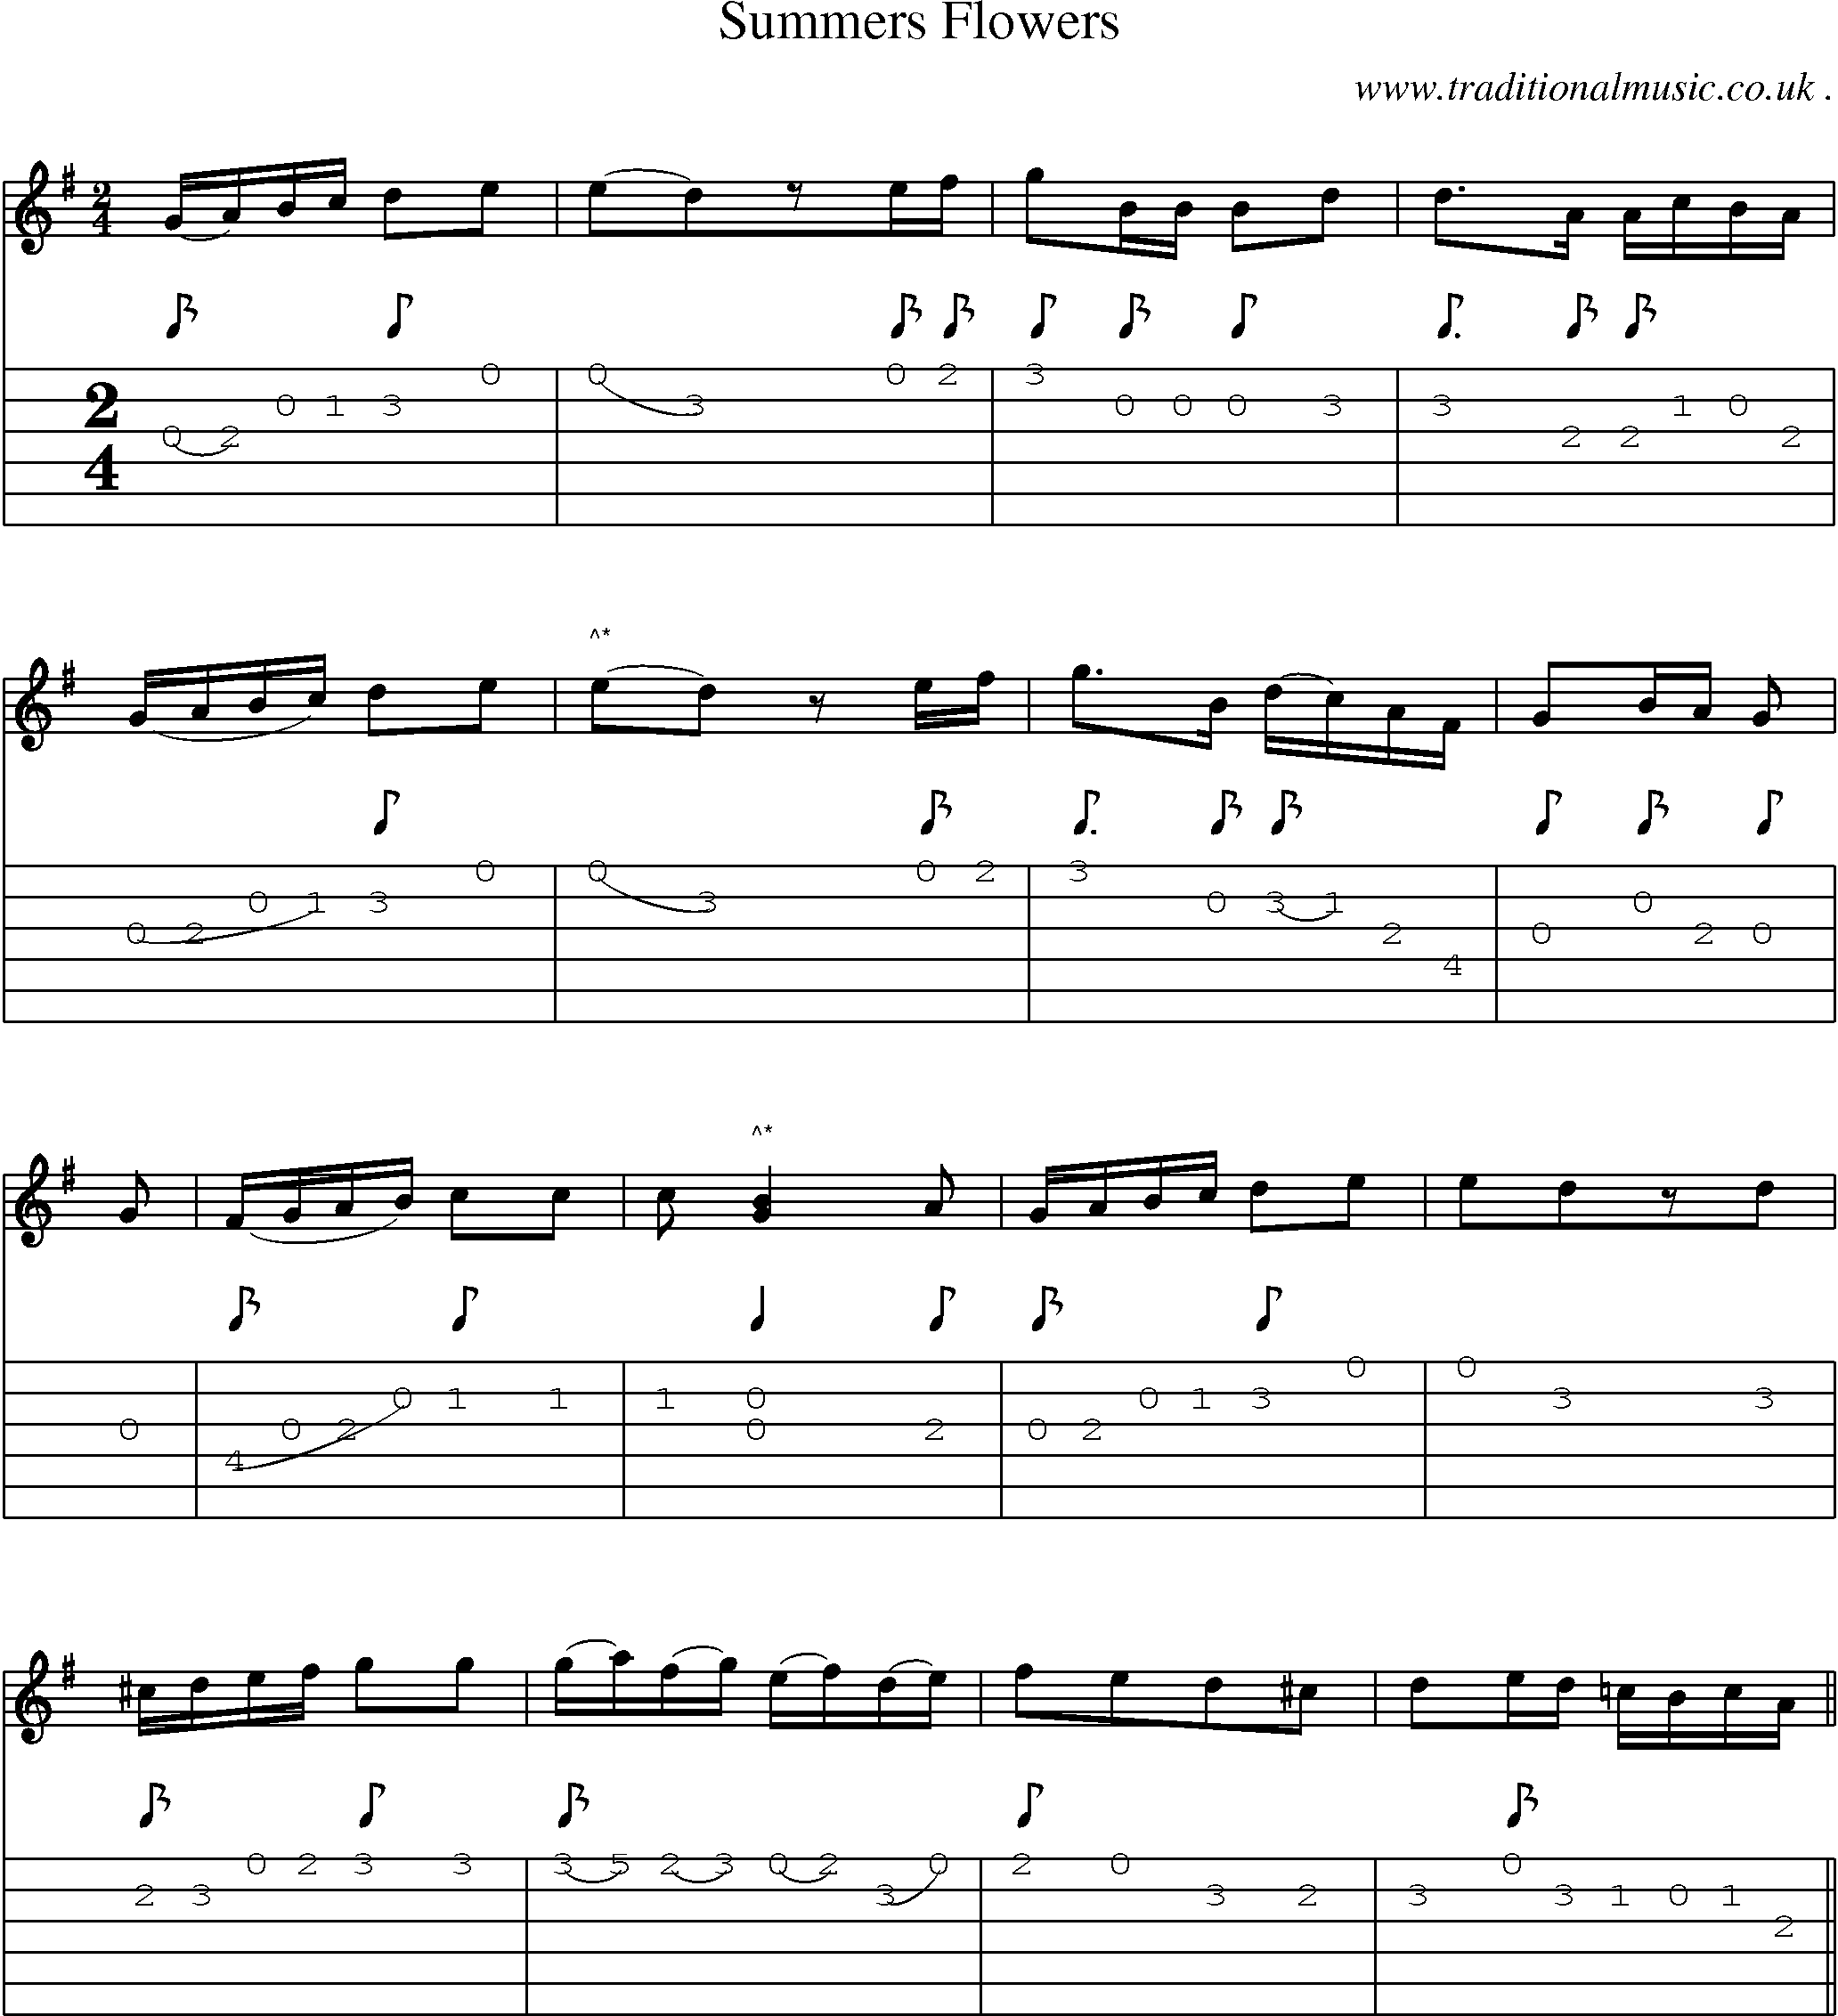 Sheet-Music and Guitar Tabs for Summers Flowers